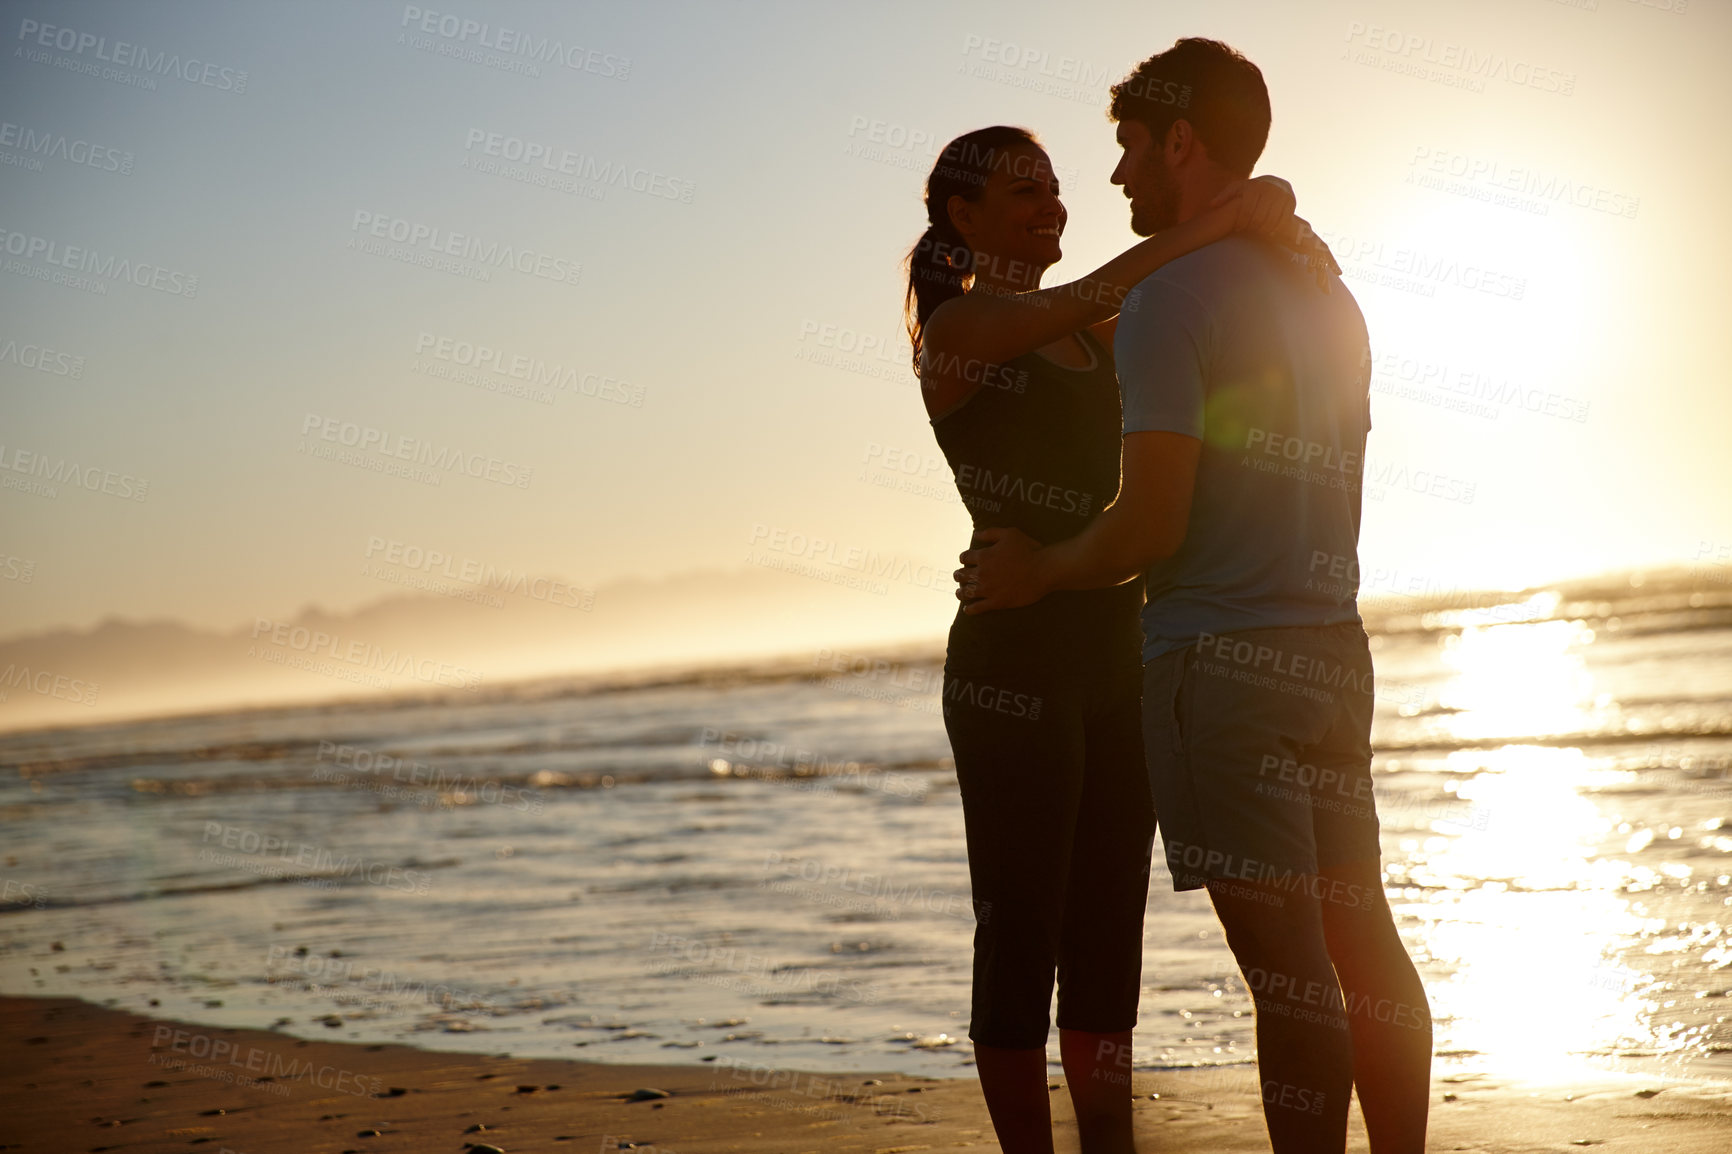 Buy stock photo Shot of a hugging couple silhouetted against a sunrise over the sea